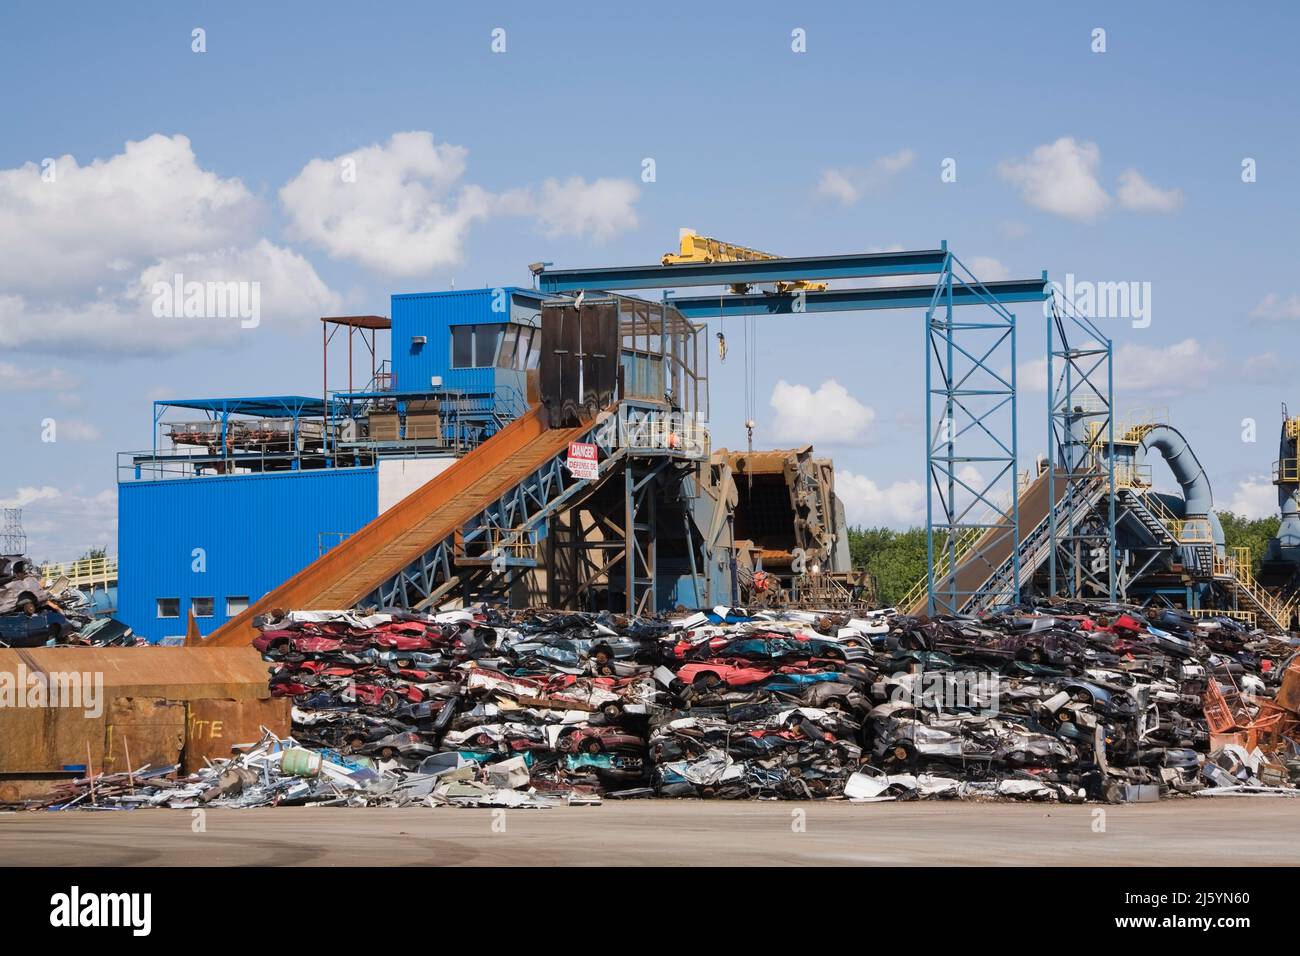 https://c8.alamy.com/comp/2J5YN60/stacked-and-crushed-automobiles-and-industrial-metal-shredder-at-a-scrap-metal-recycling-yard-2J5YN60.jpg